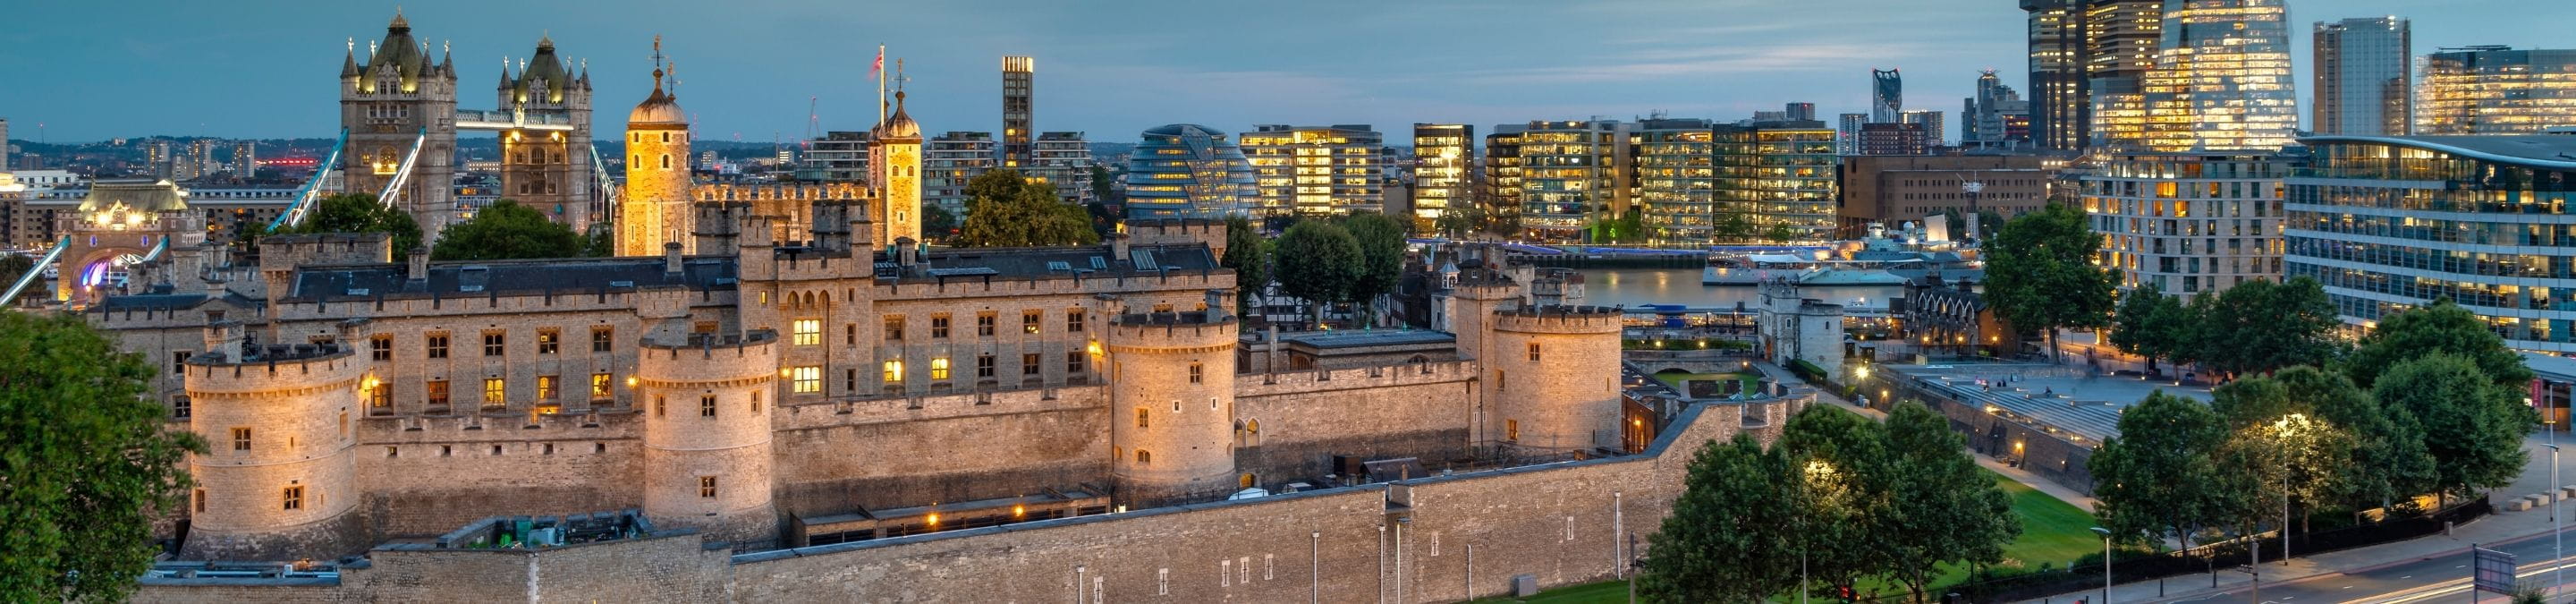 view of Tower of London and Tower Bridge from the Tower Suites